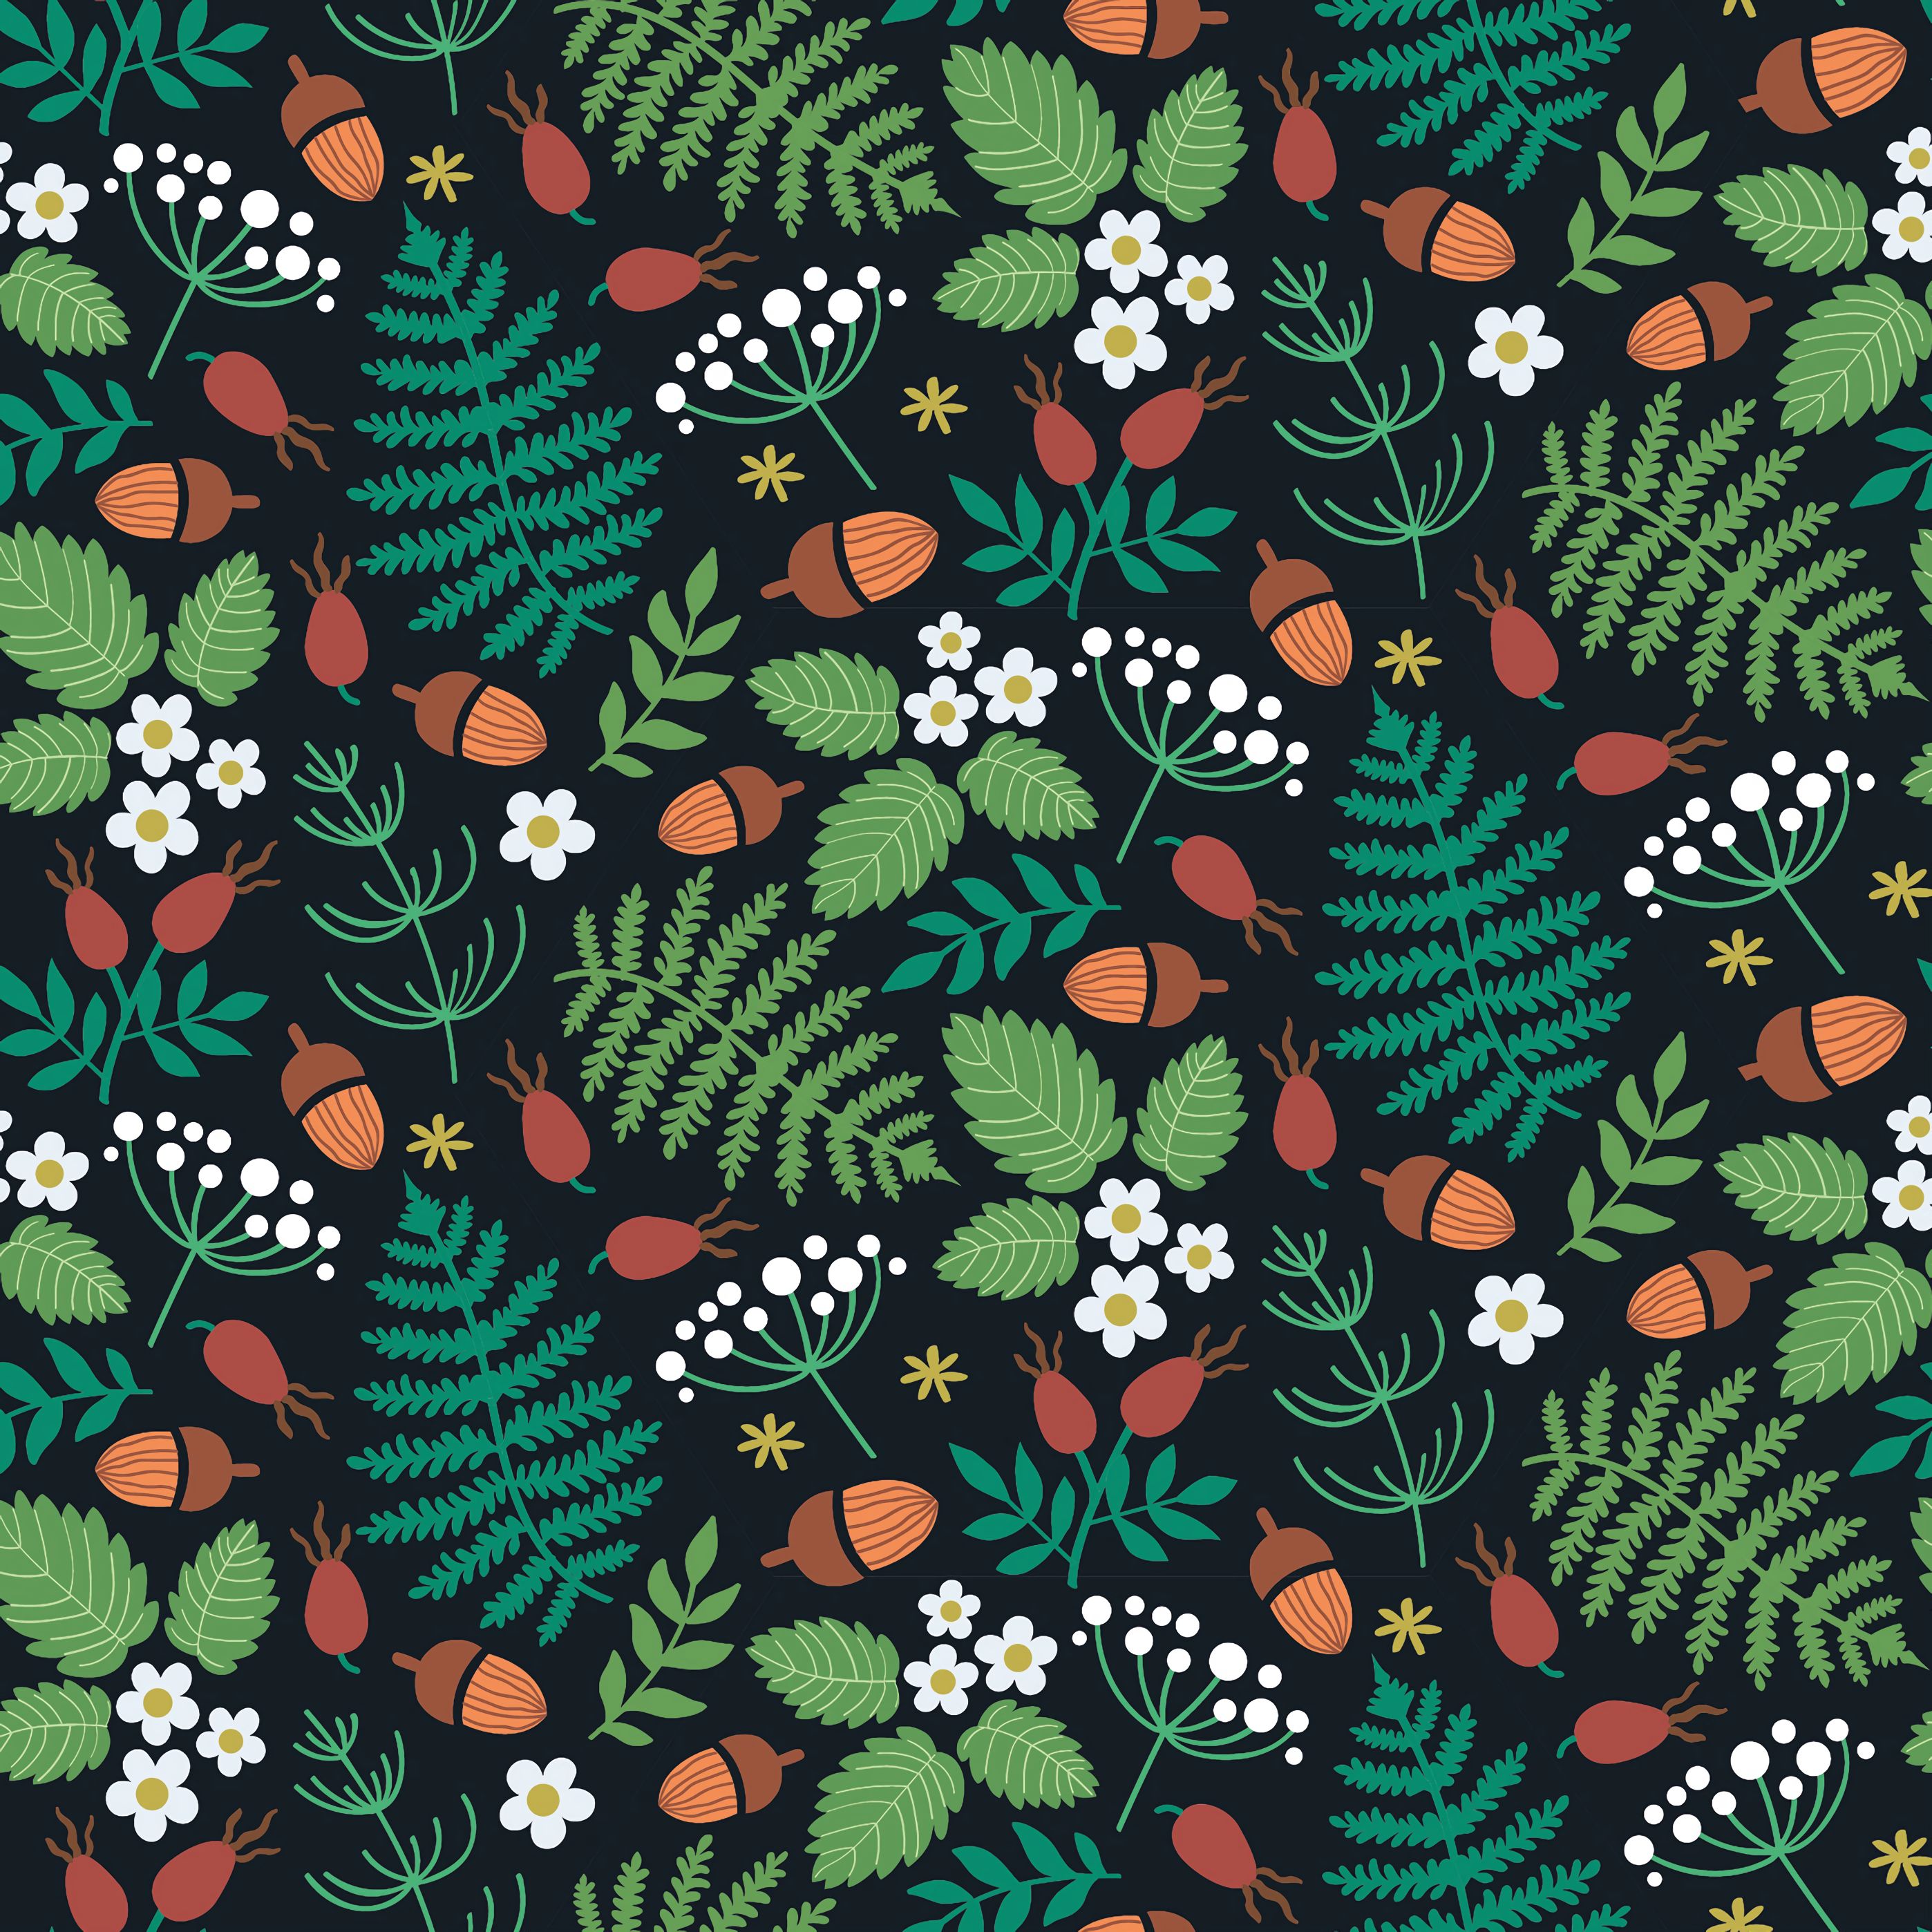 texture, textures, forest, pattern, leaves, strawberry, berries, acorns, wild strawberries, motive iphone wallpaper